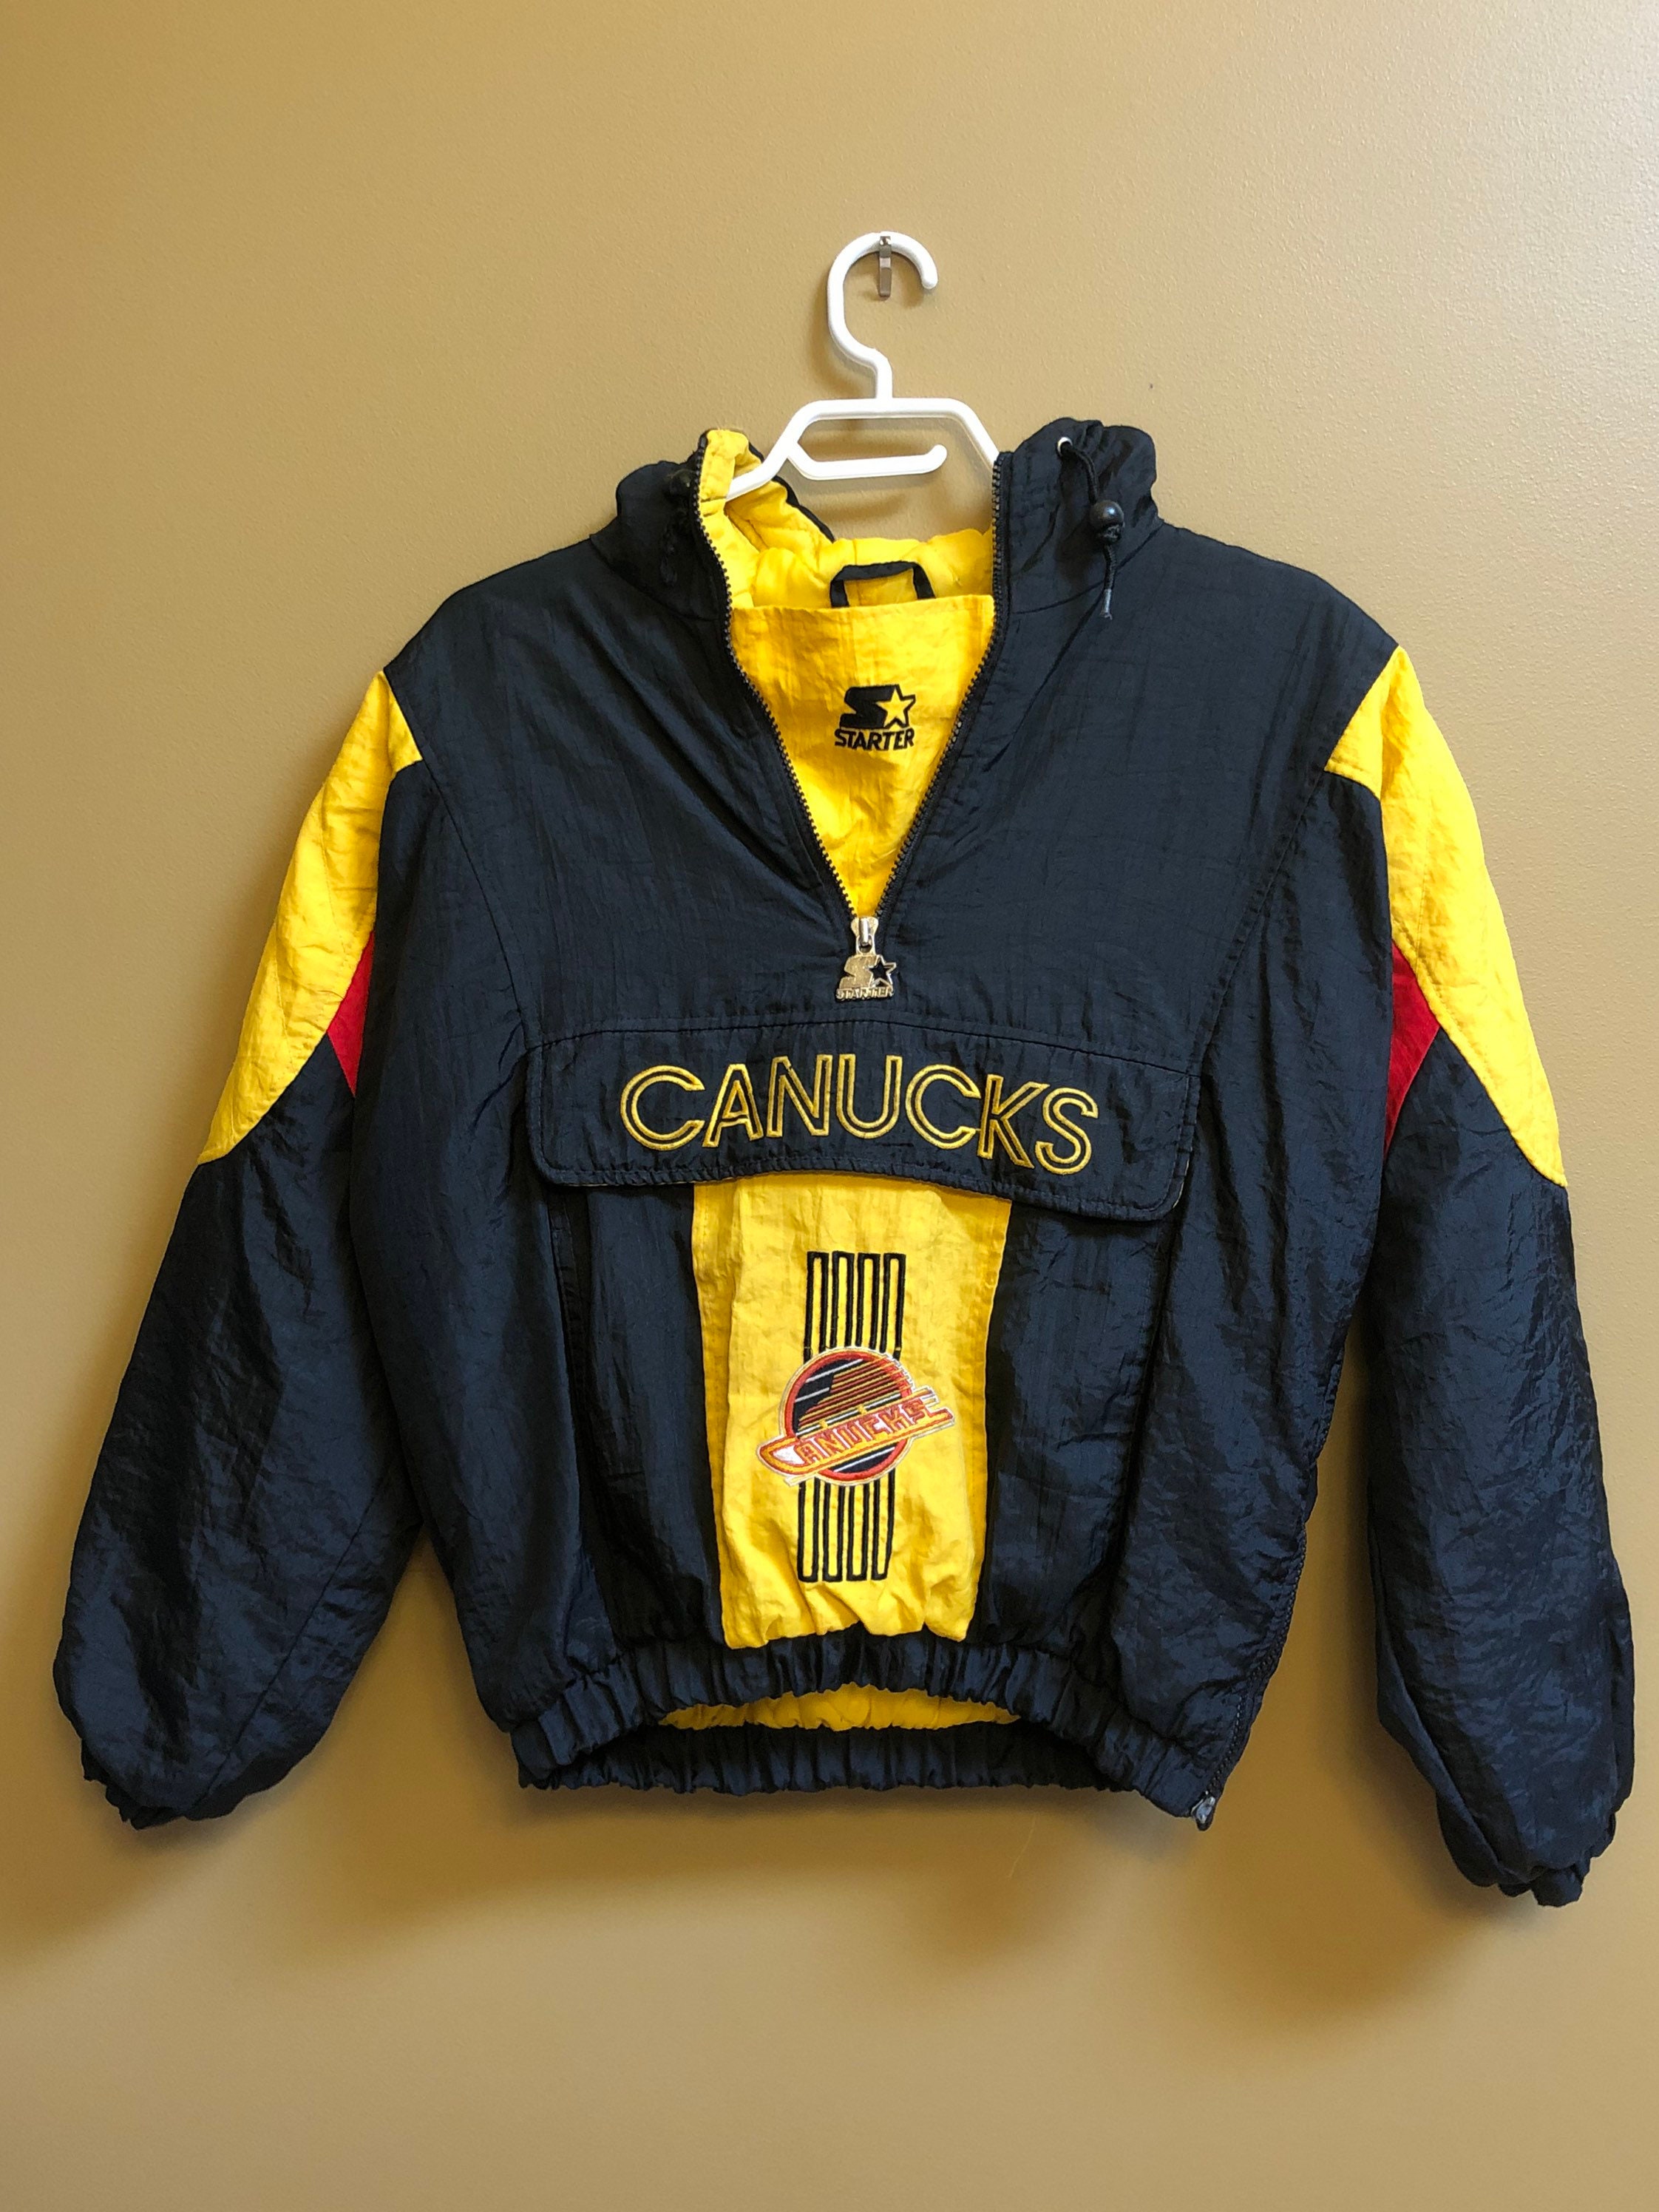 90s Vancouver Canucks starter jacket split. Size Large $175 available in  store only . FCFS. 🔹SOLD🔹